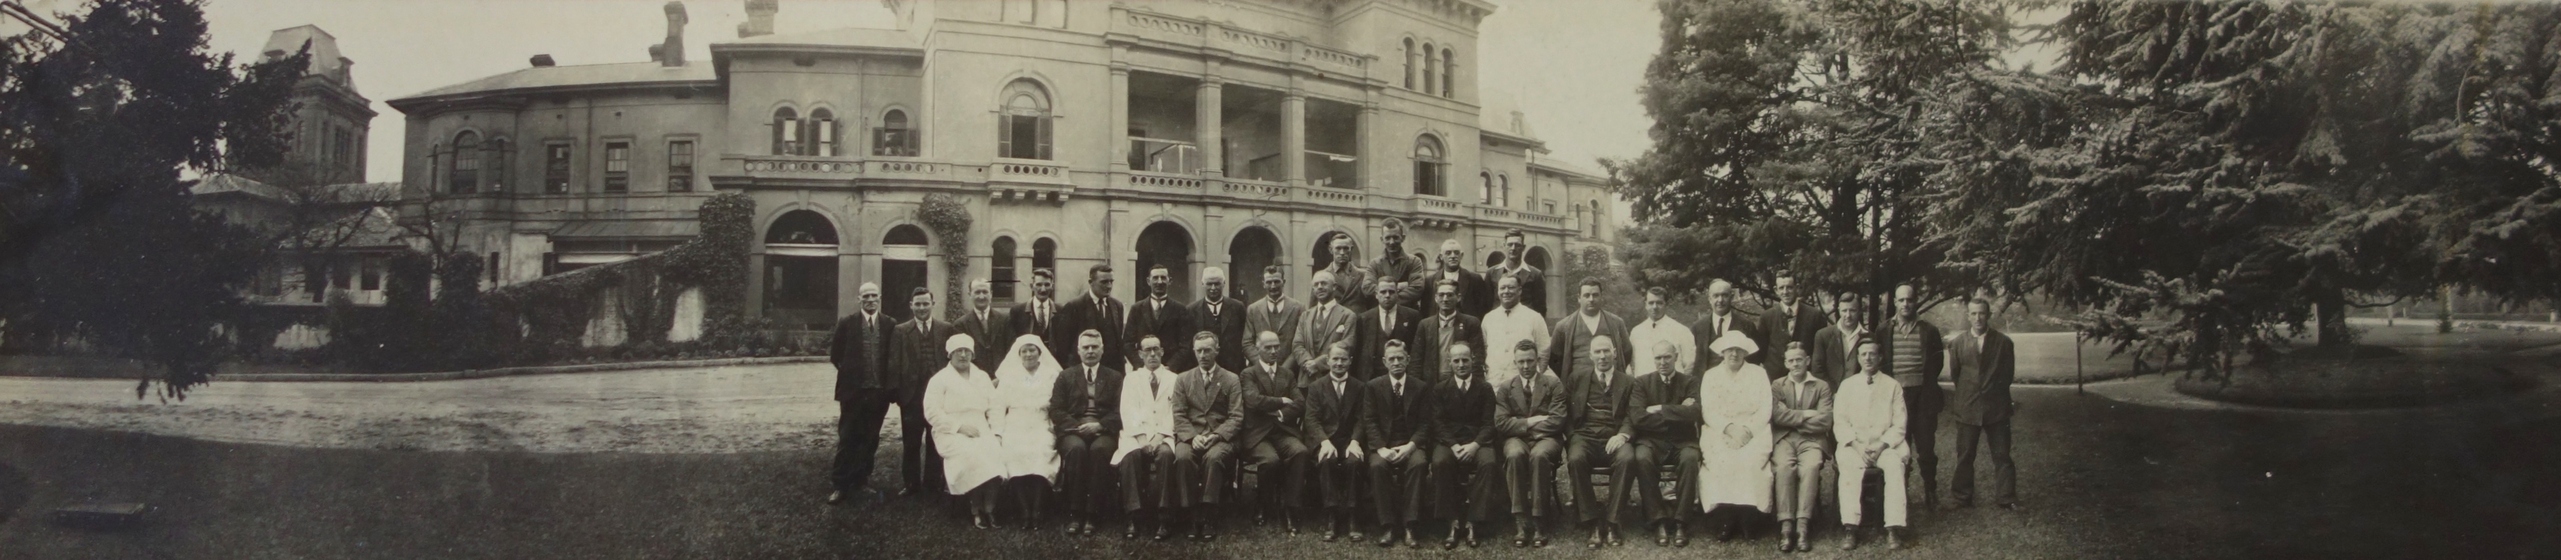 Group of staff men and women in front of building